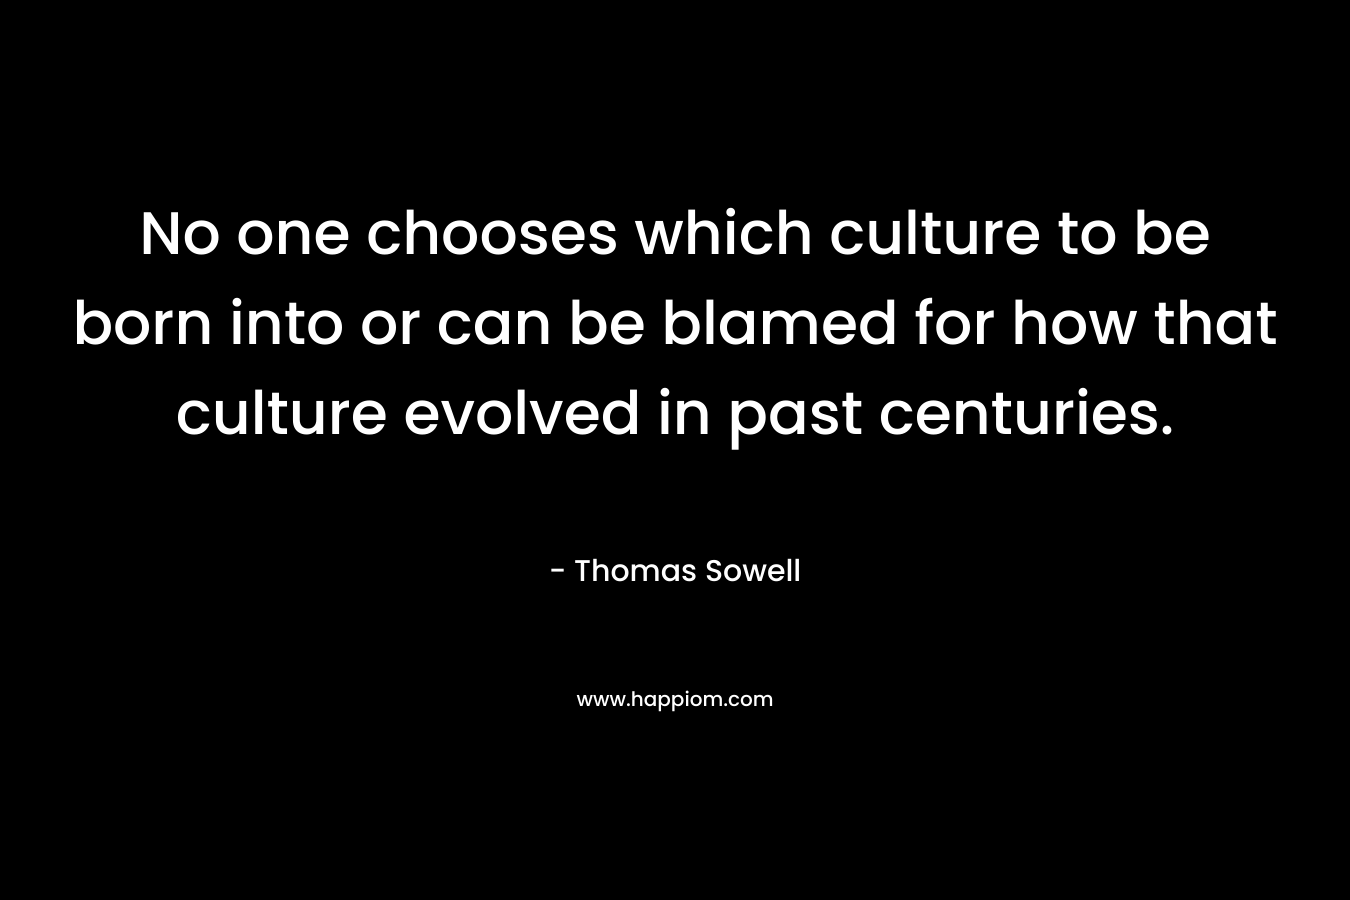 No one chooses which culture to be born into or can be blamed for how that culture evolved in past centuries.